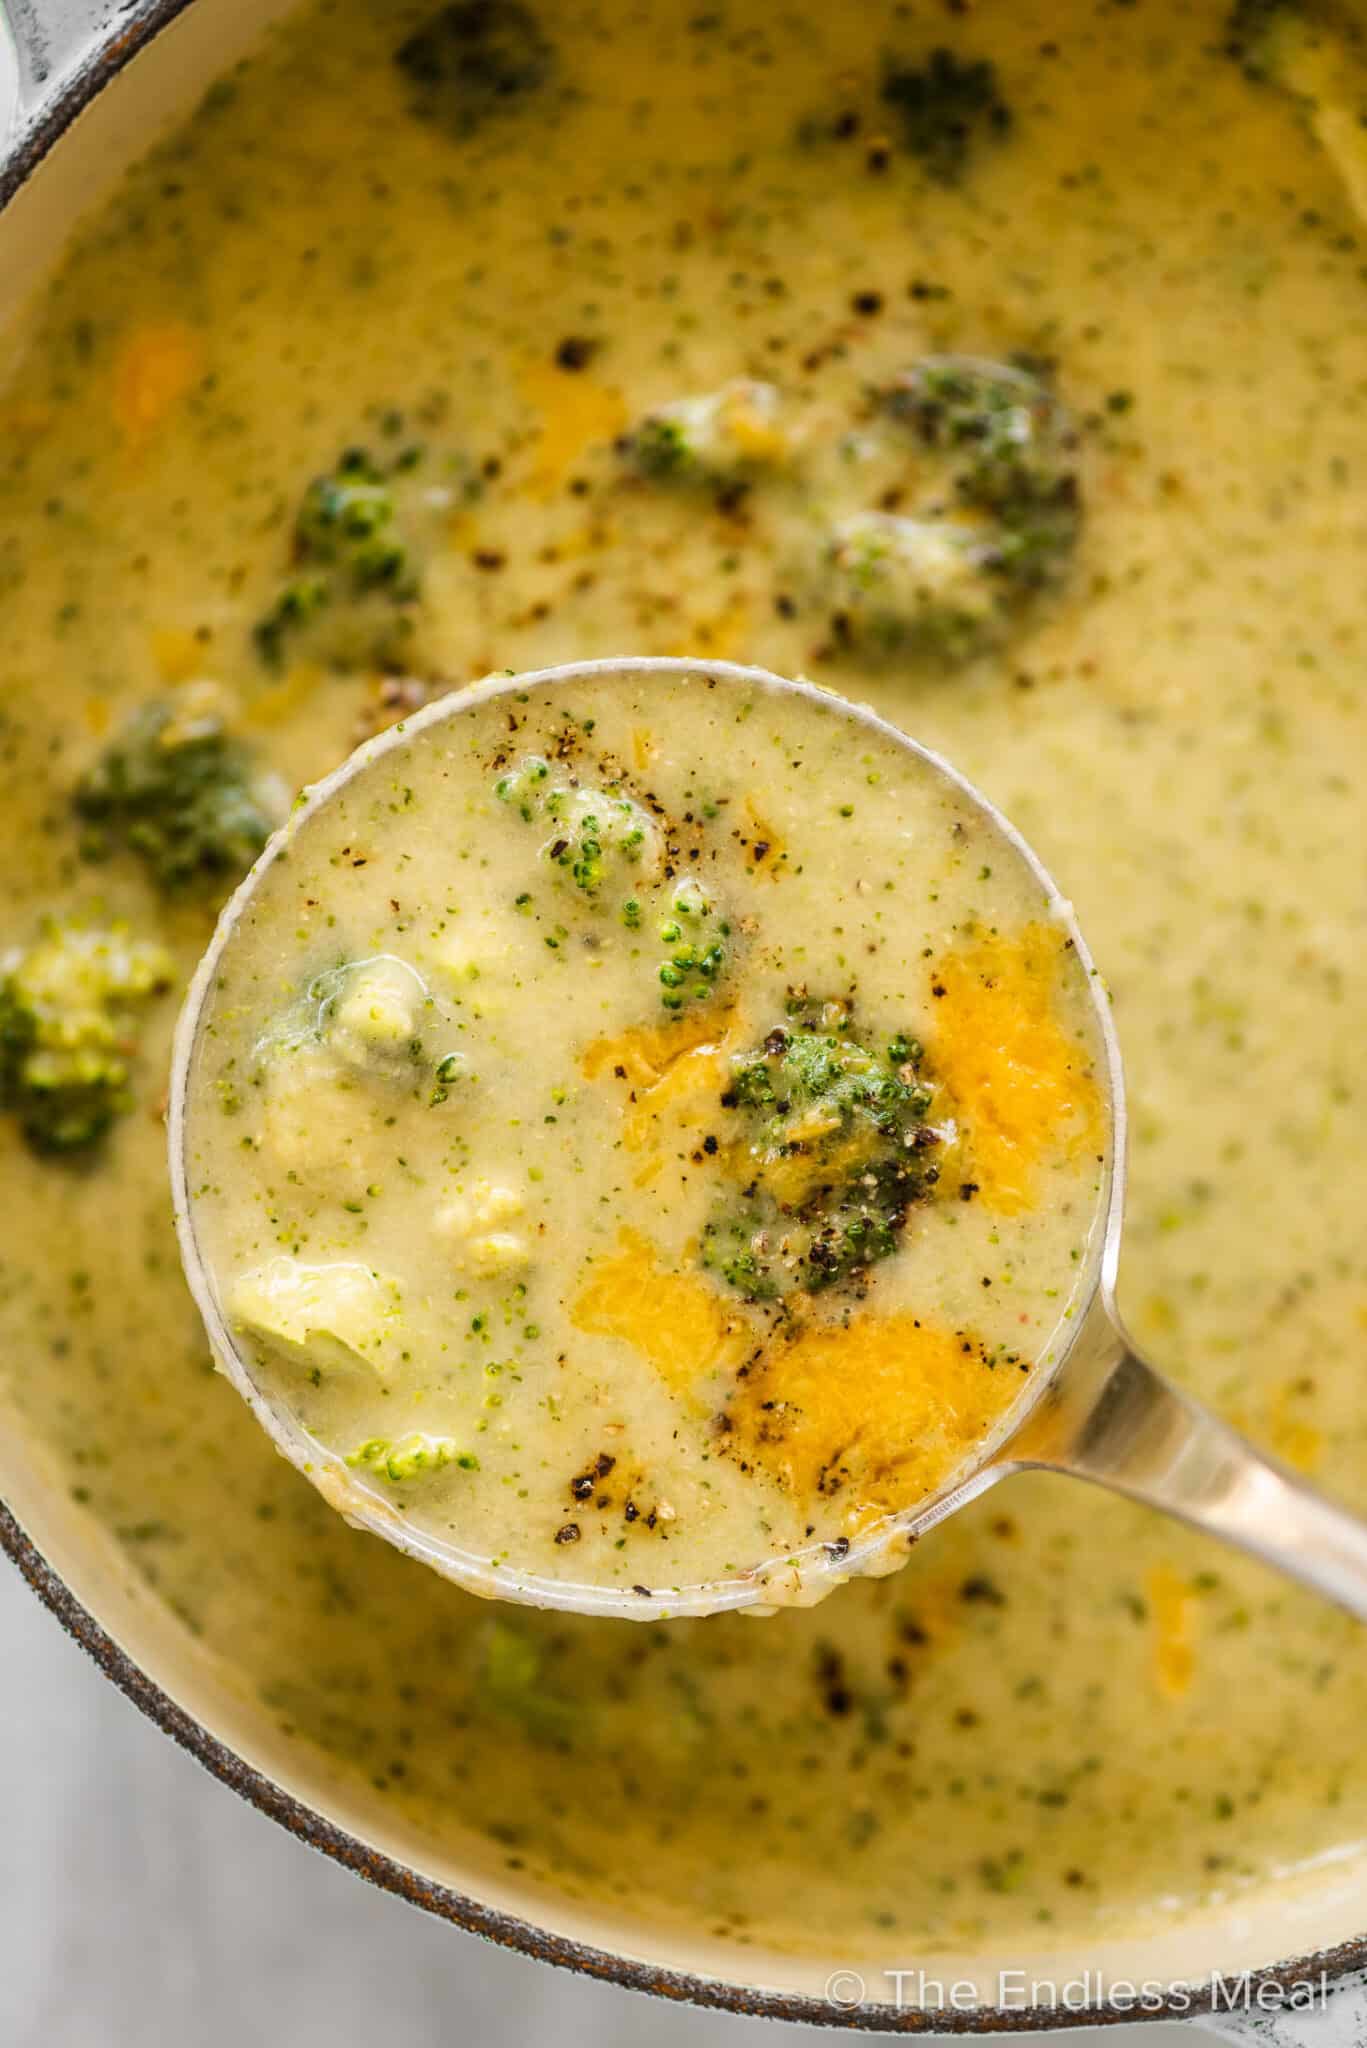 A ladle taking a scoop of broccoli cheese soup out of a pot.